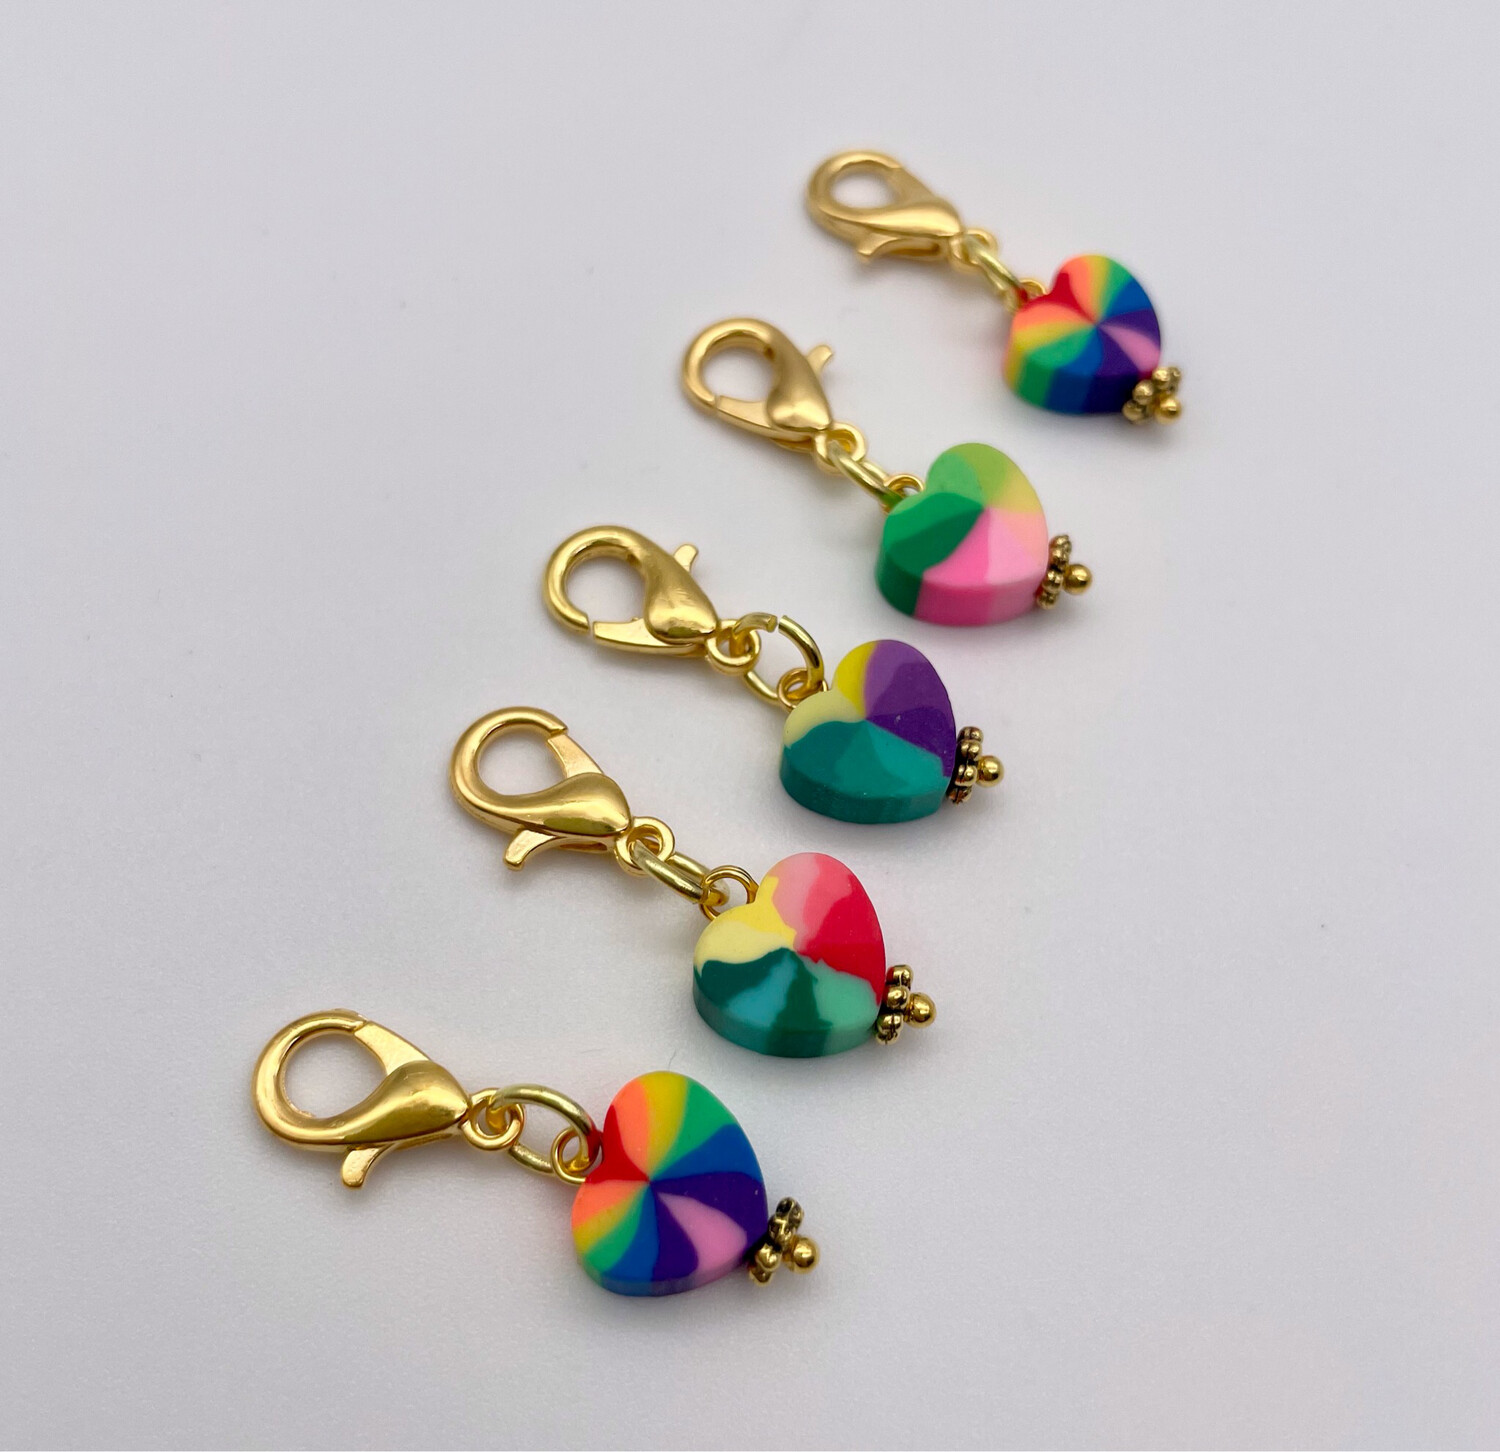 Rainbow Heart Stitch Markers - pack of 5